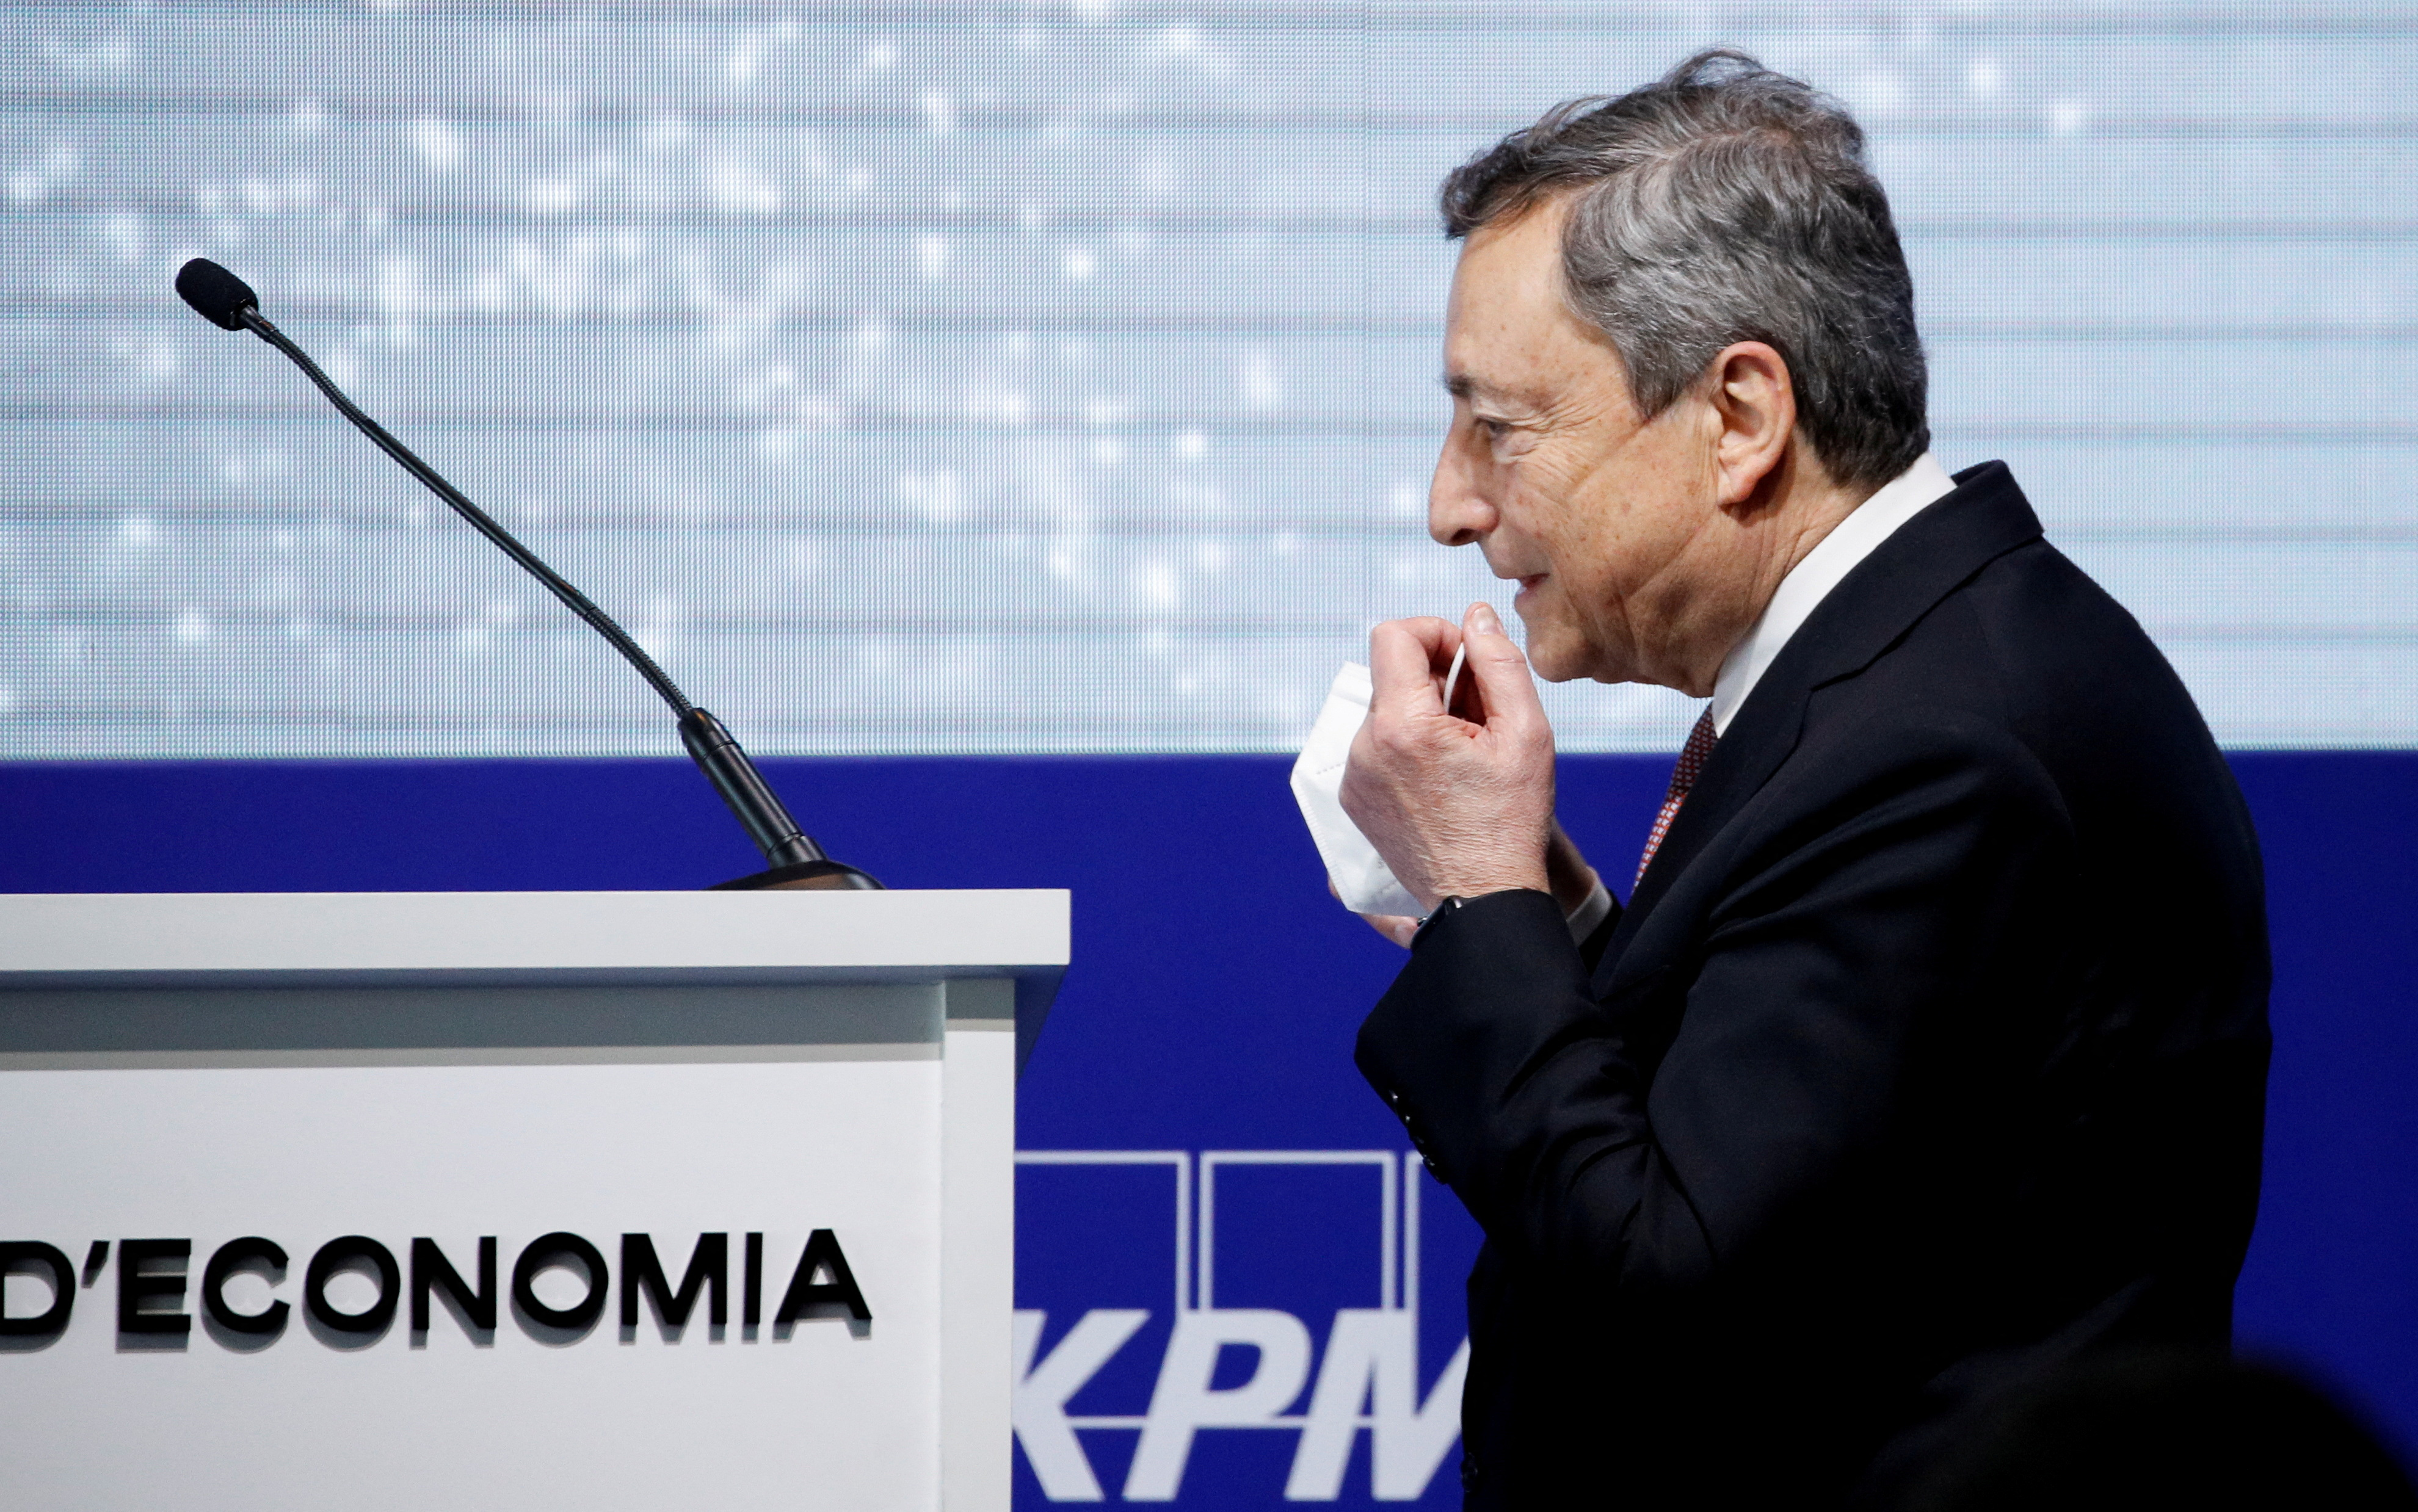 Italian Prime Minister Mario Draghi at an economic conference in Barcelona, Spain